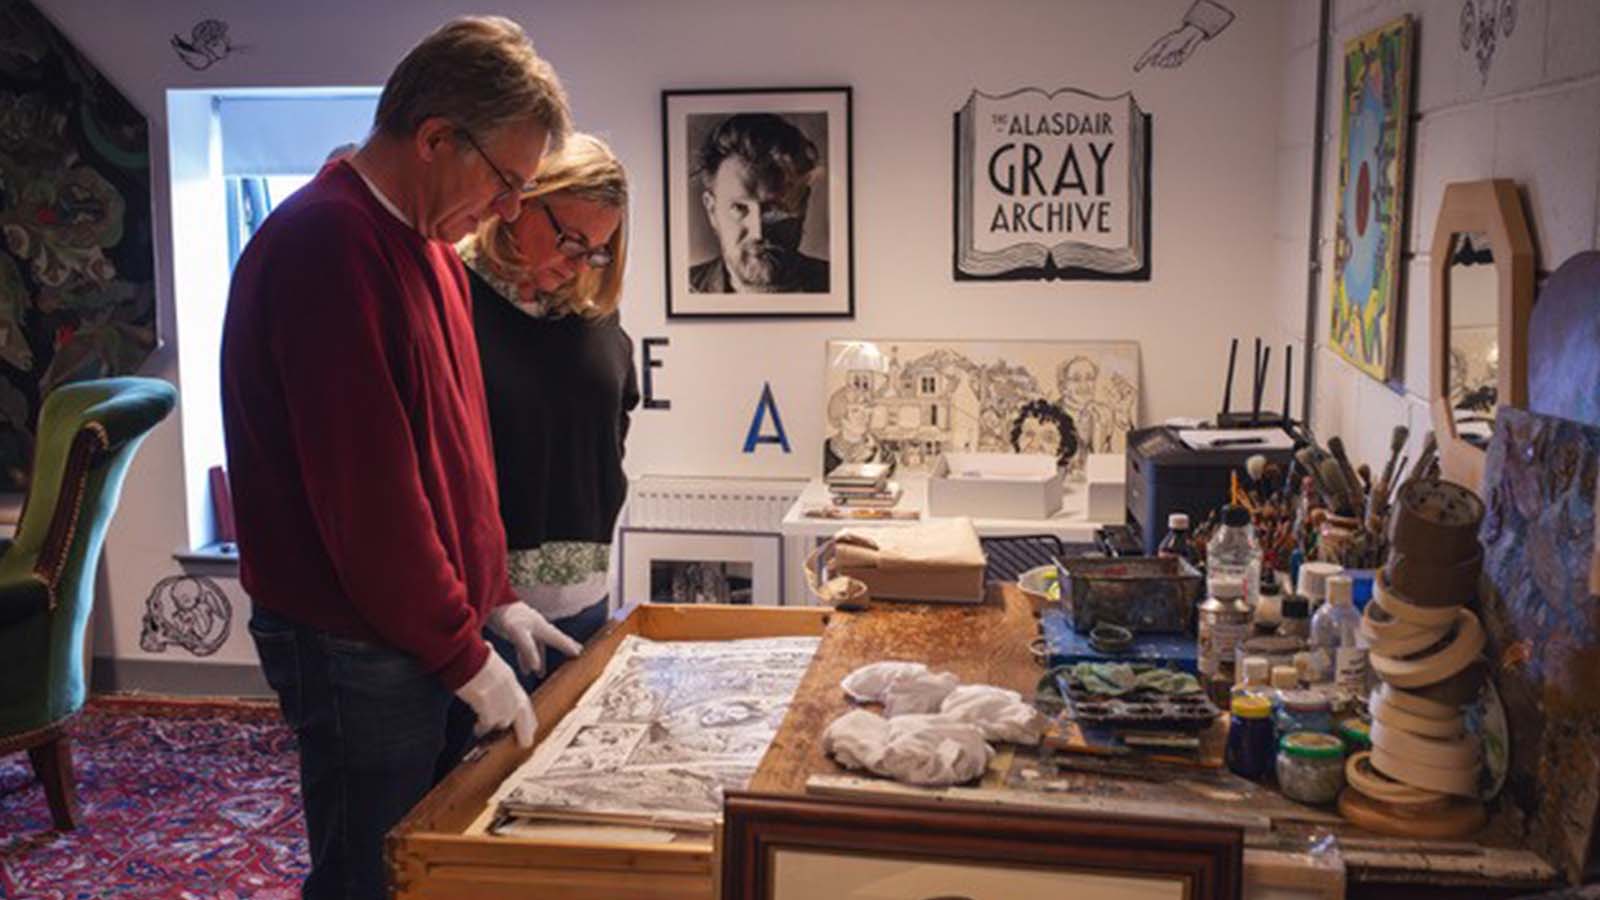 Two people examining the open drawer of an old desk covered in well-used art supplies. On the wall is a sign that reads 'Alasdair Gray Archive.'